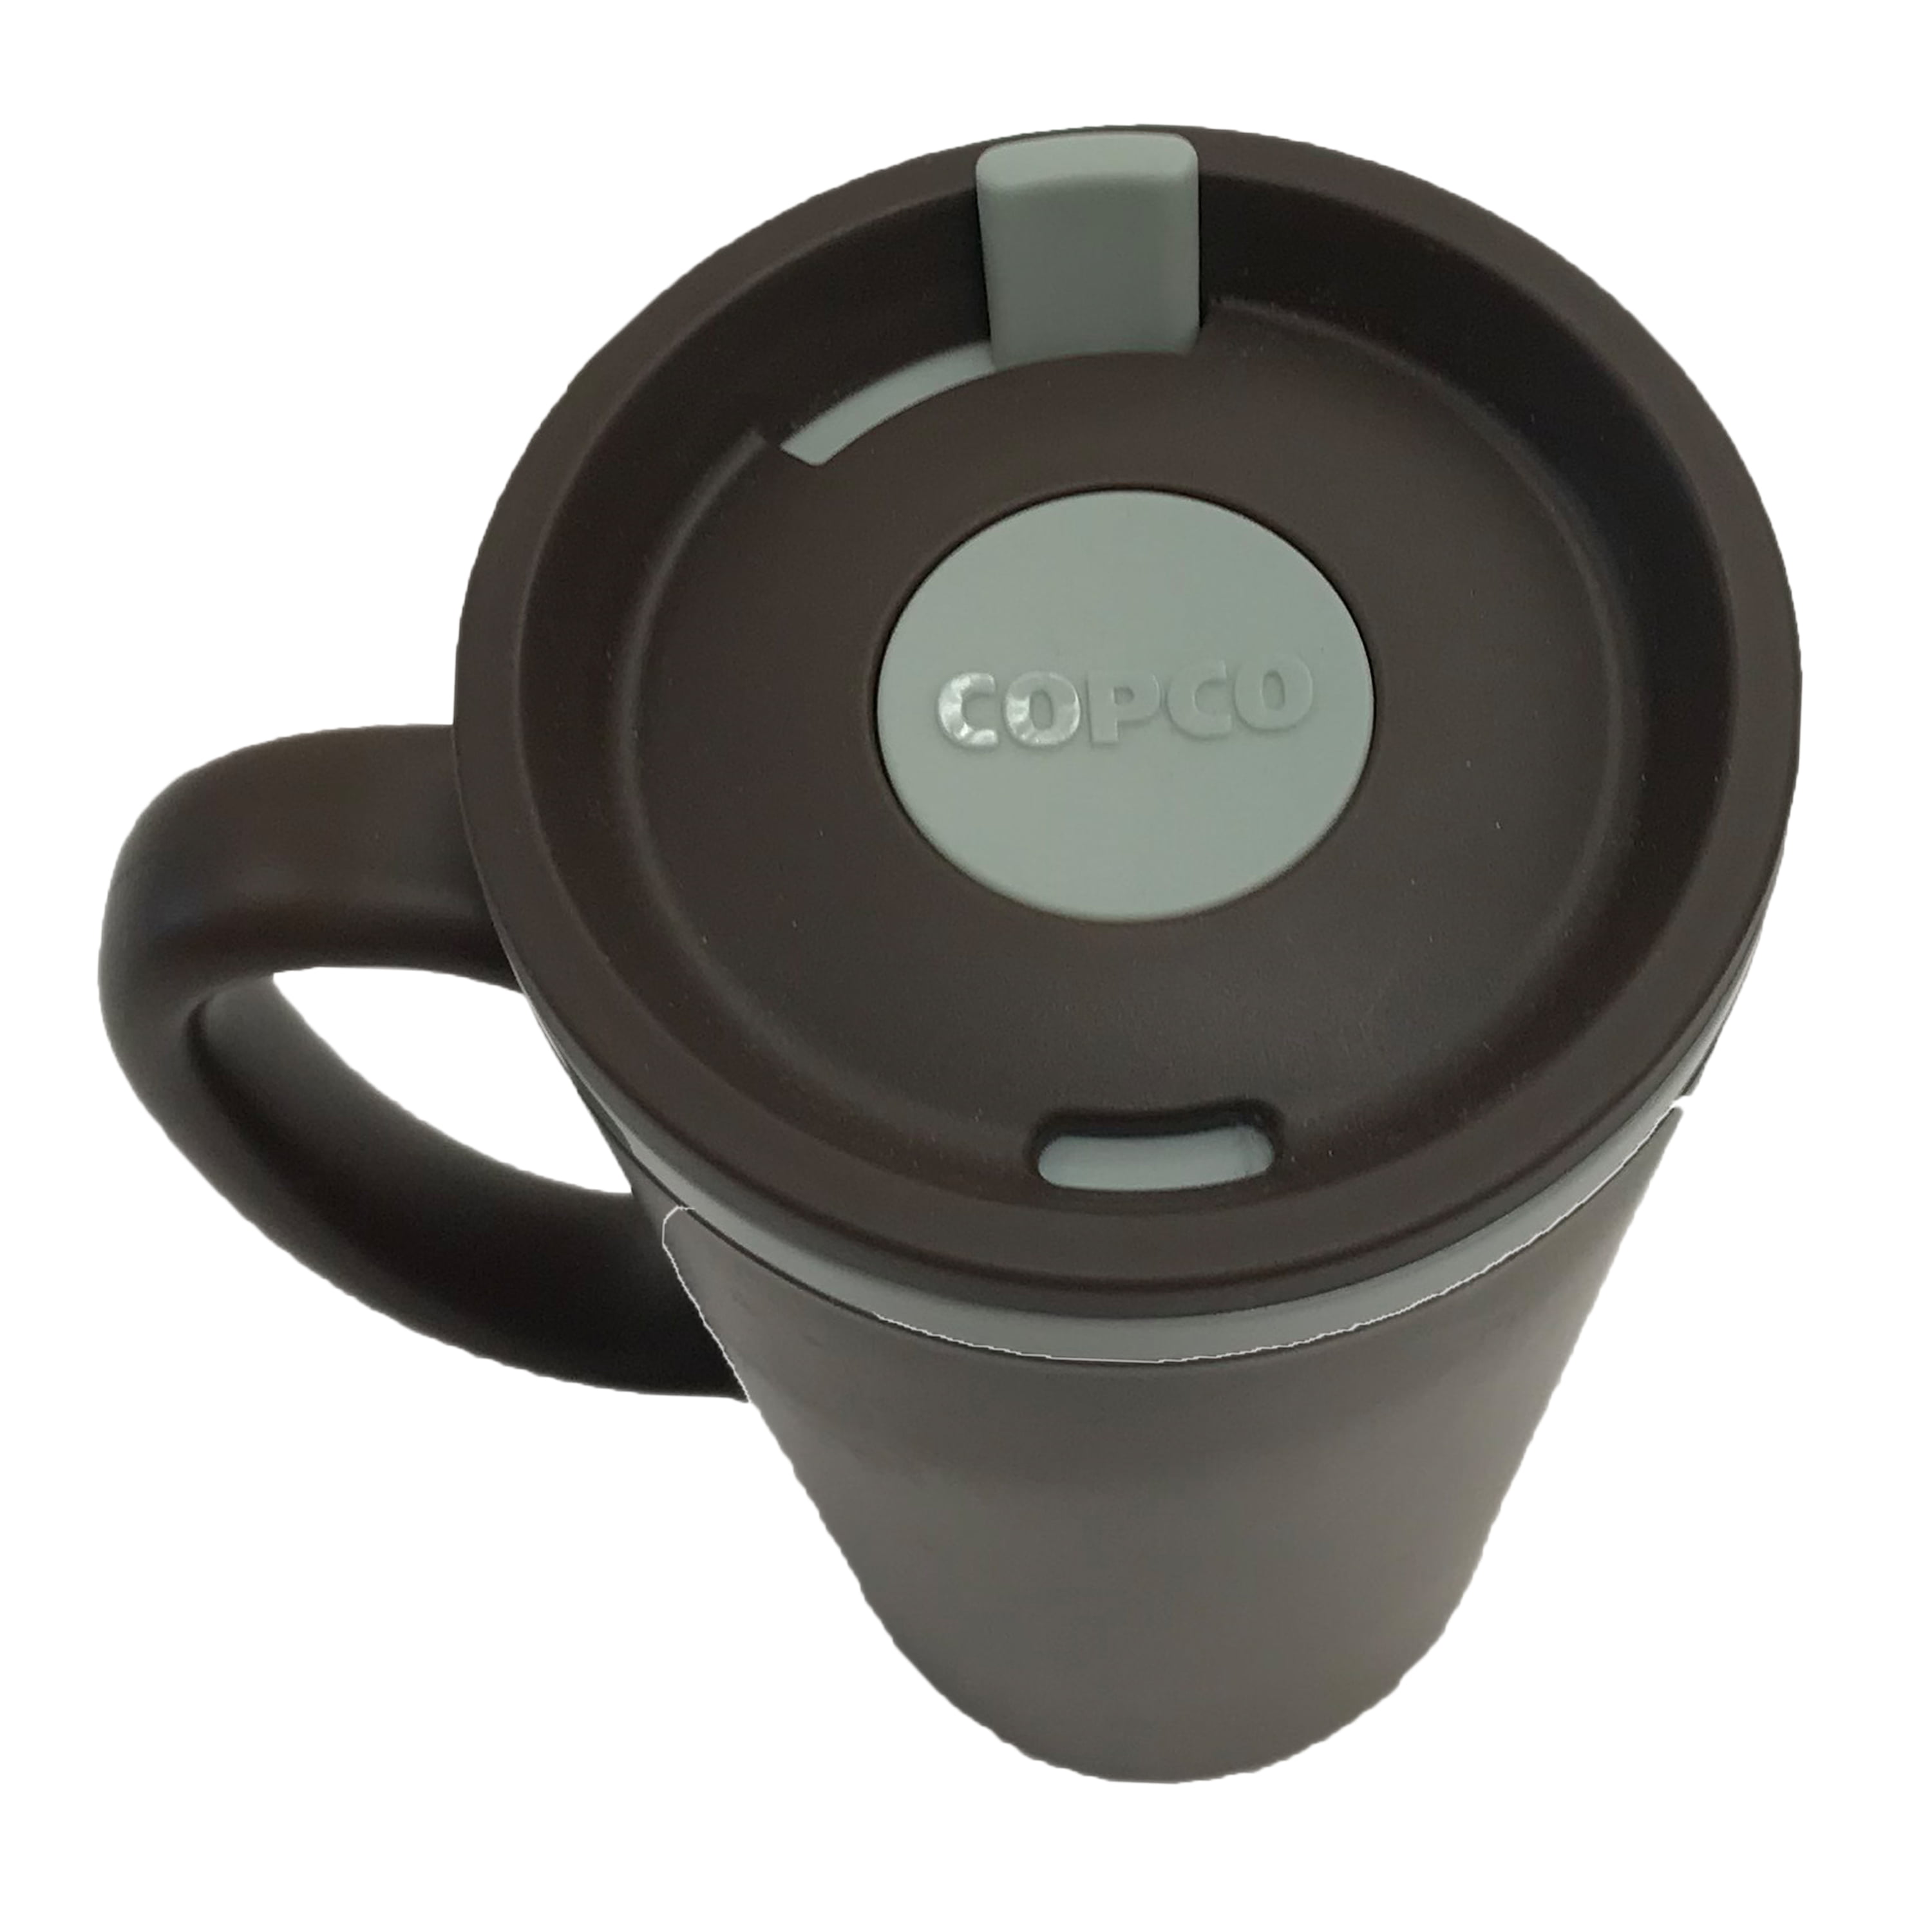 Copco Cone Double-Wall 16-Ounce Desk Mug For Only $4.97 - Hot